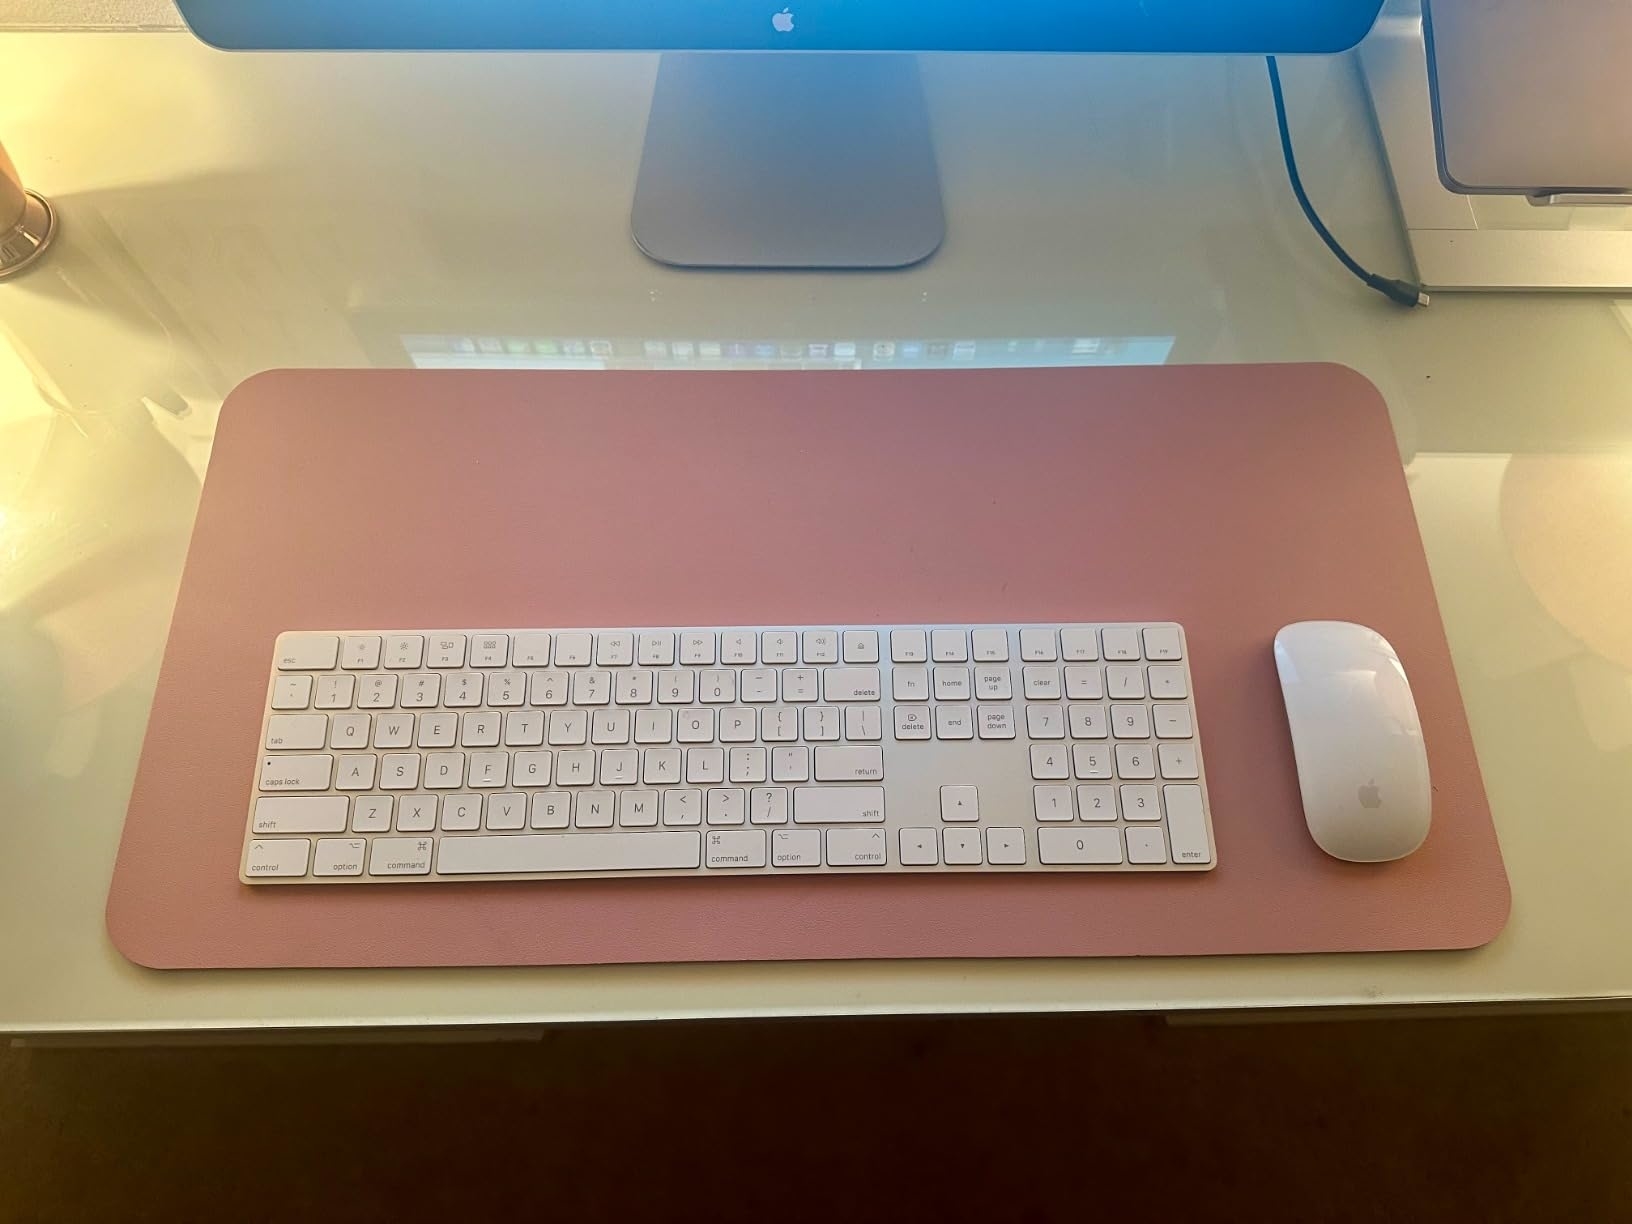 Computer desk with a white keyboard and mouse on a pink mat, technology setup for online shopping